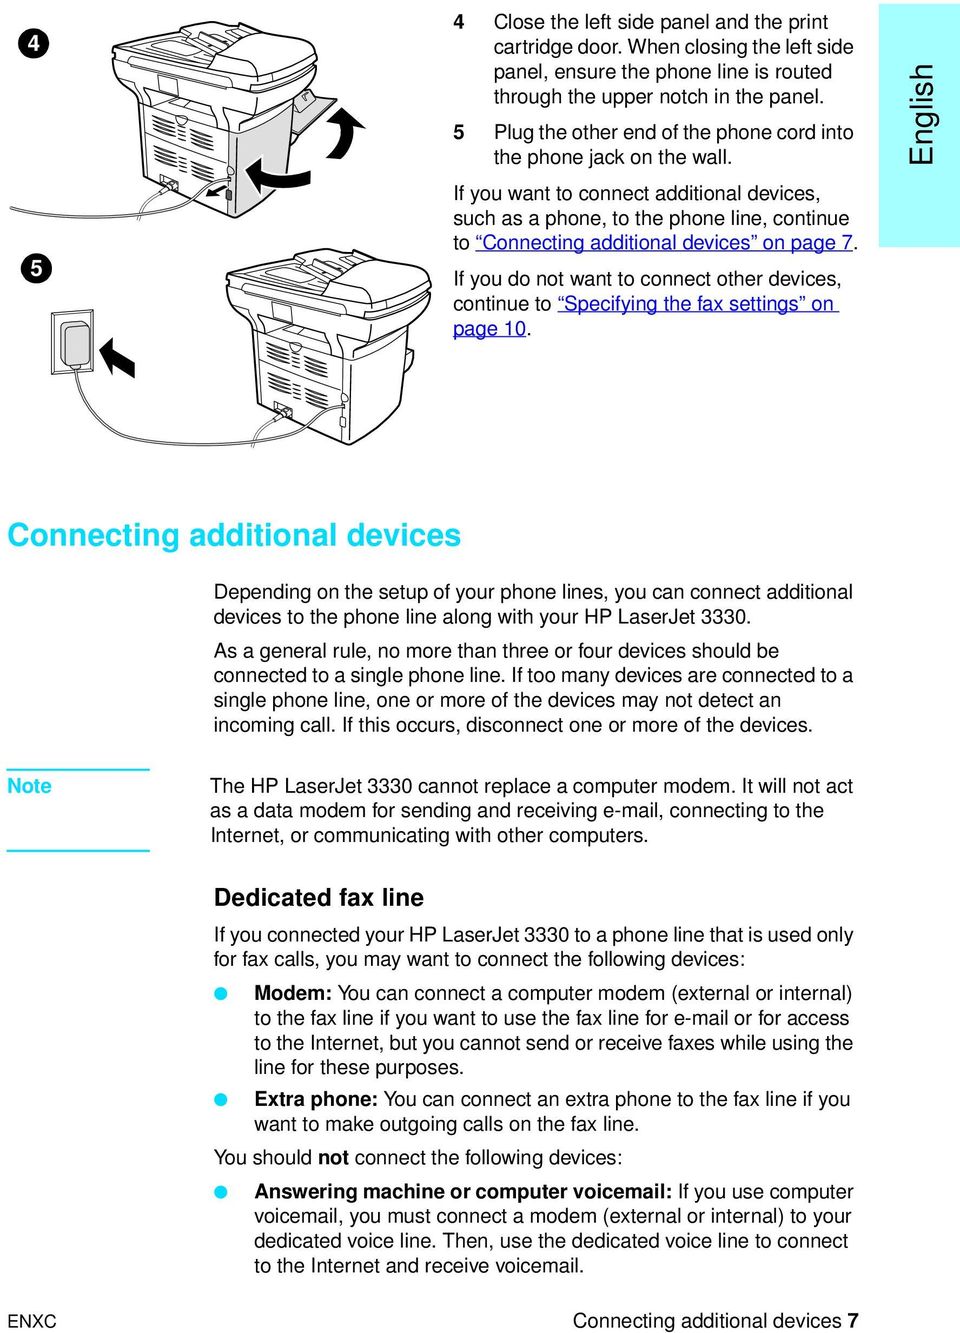 If you want to connect additional devices, such as a phone, to the phone line, continue to Connecting additional devices on page 7.